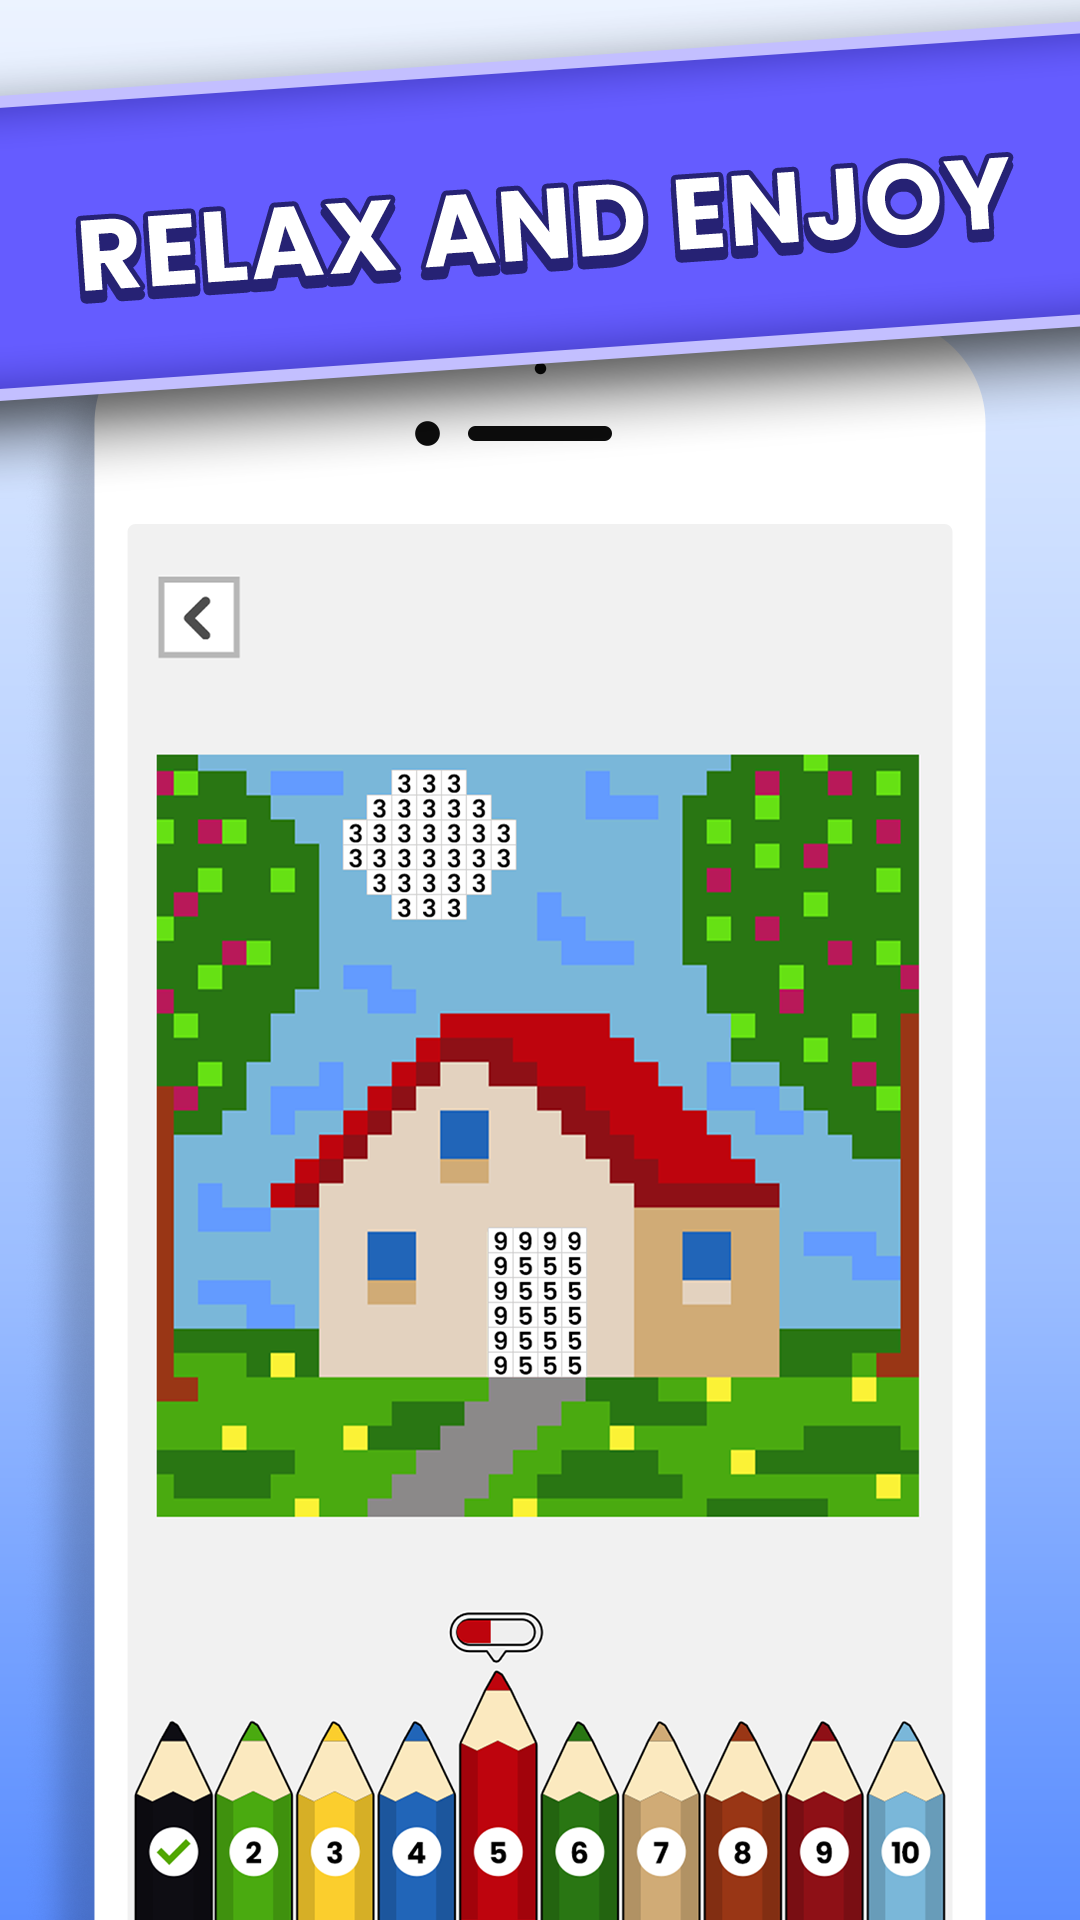 Rainbow Pixel Art - APK Download for Android